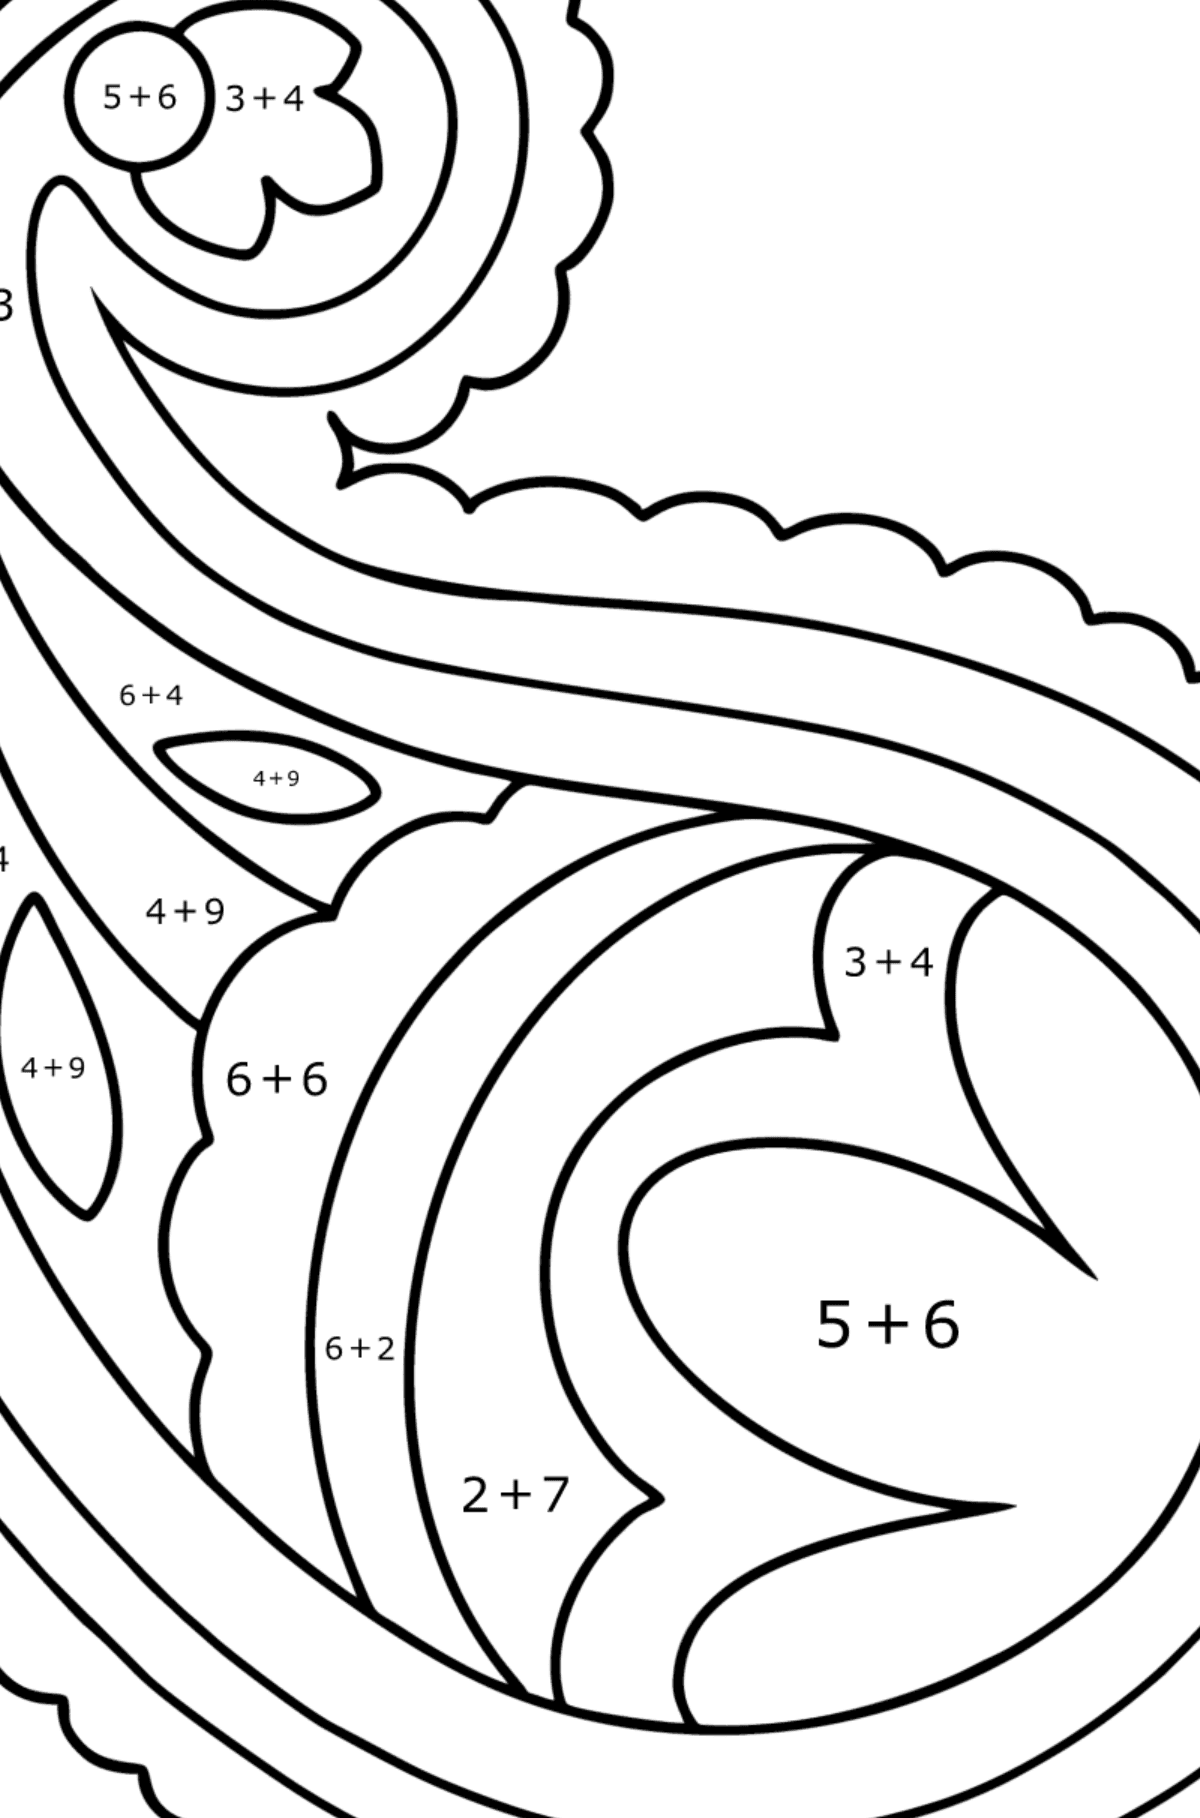 Paisley coloring page - 16 Elements - Math Coloring - Addition for Kids